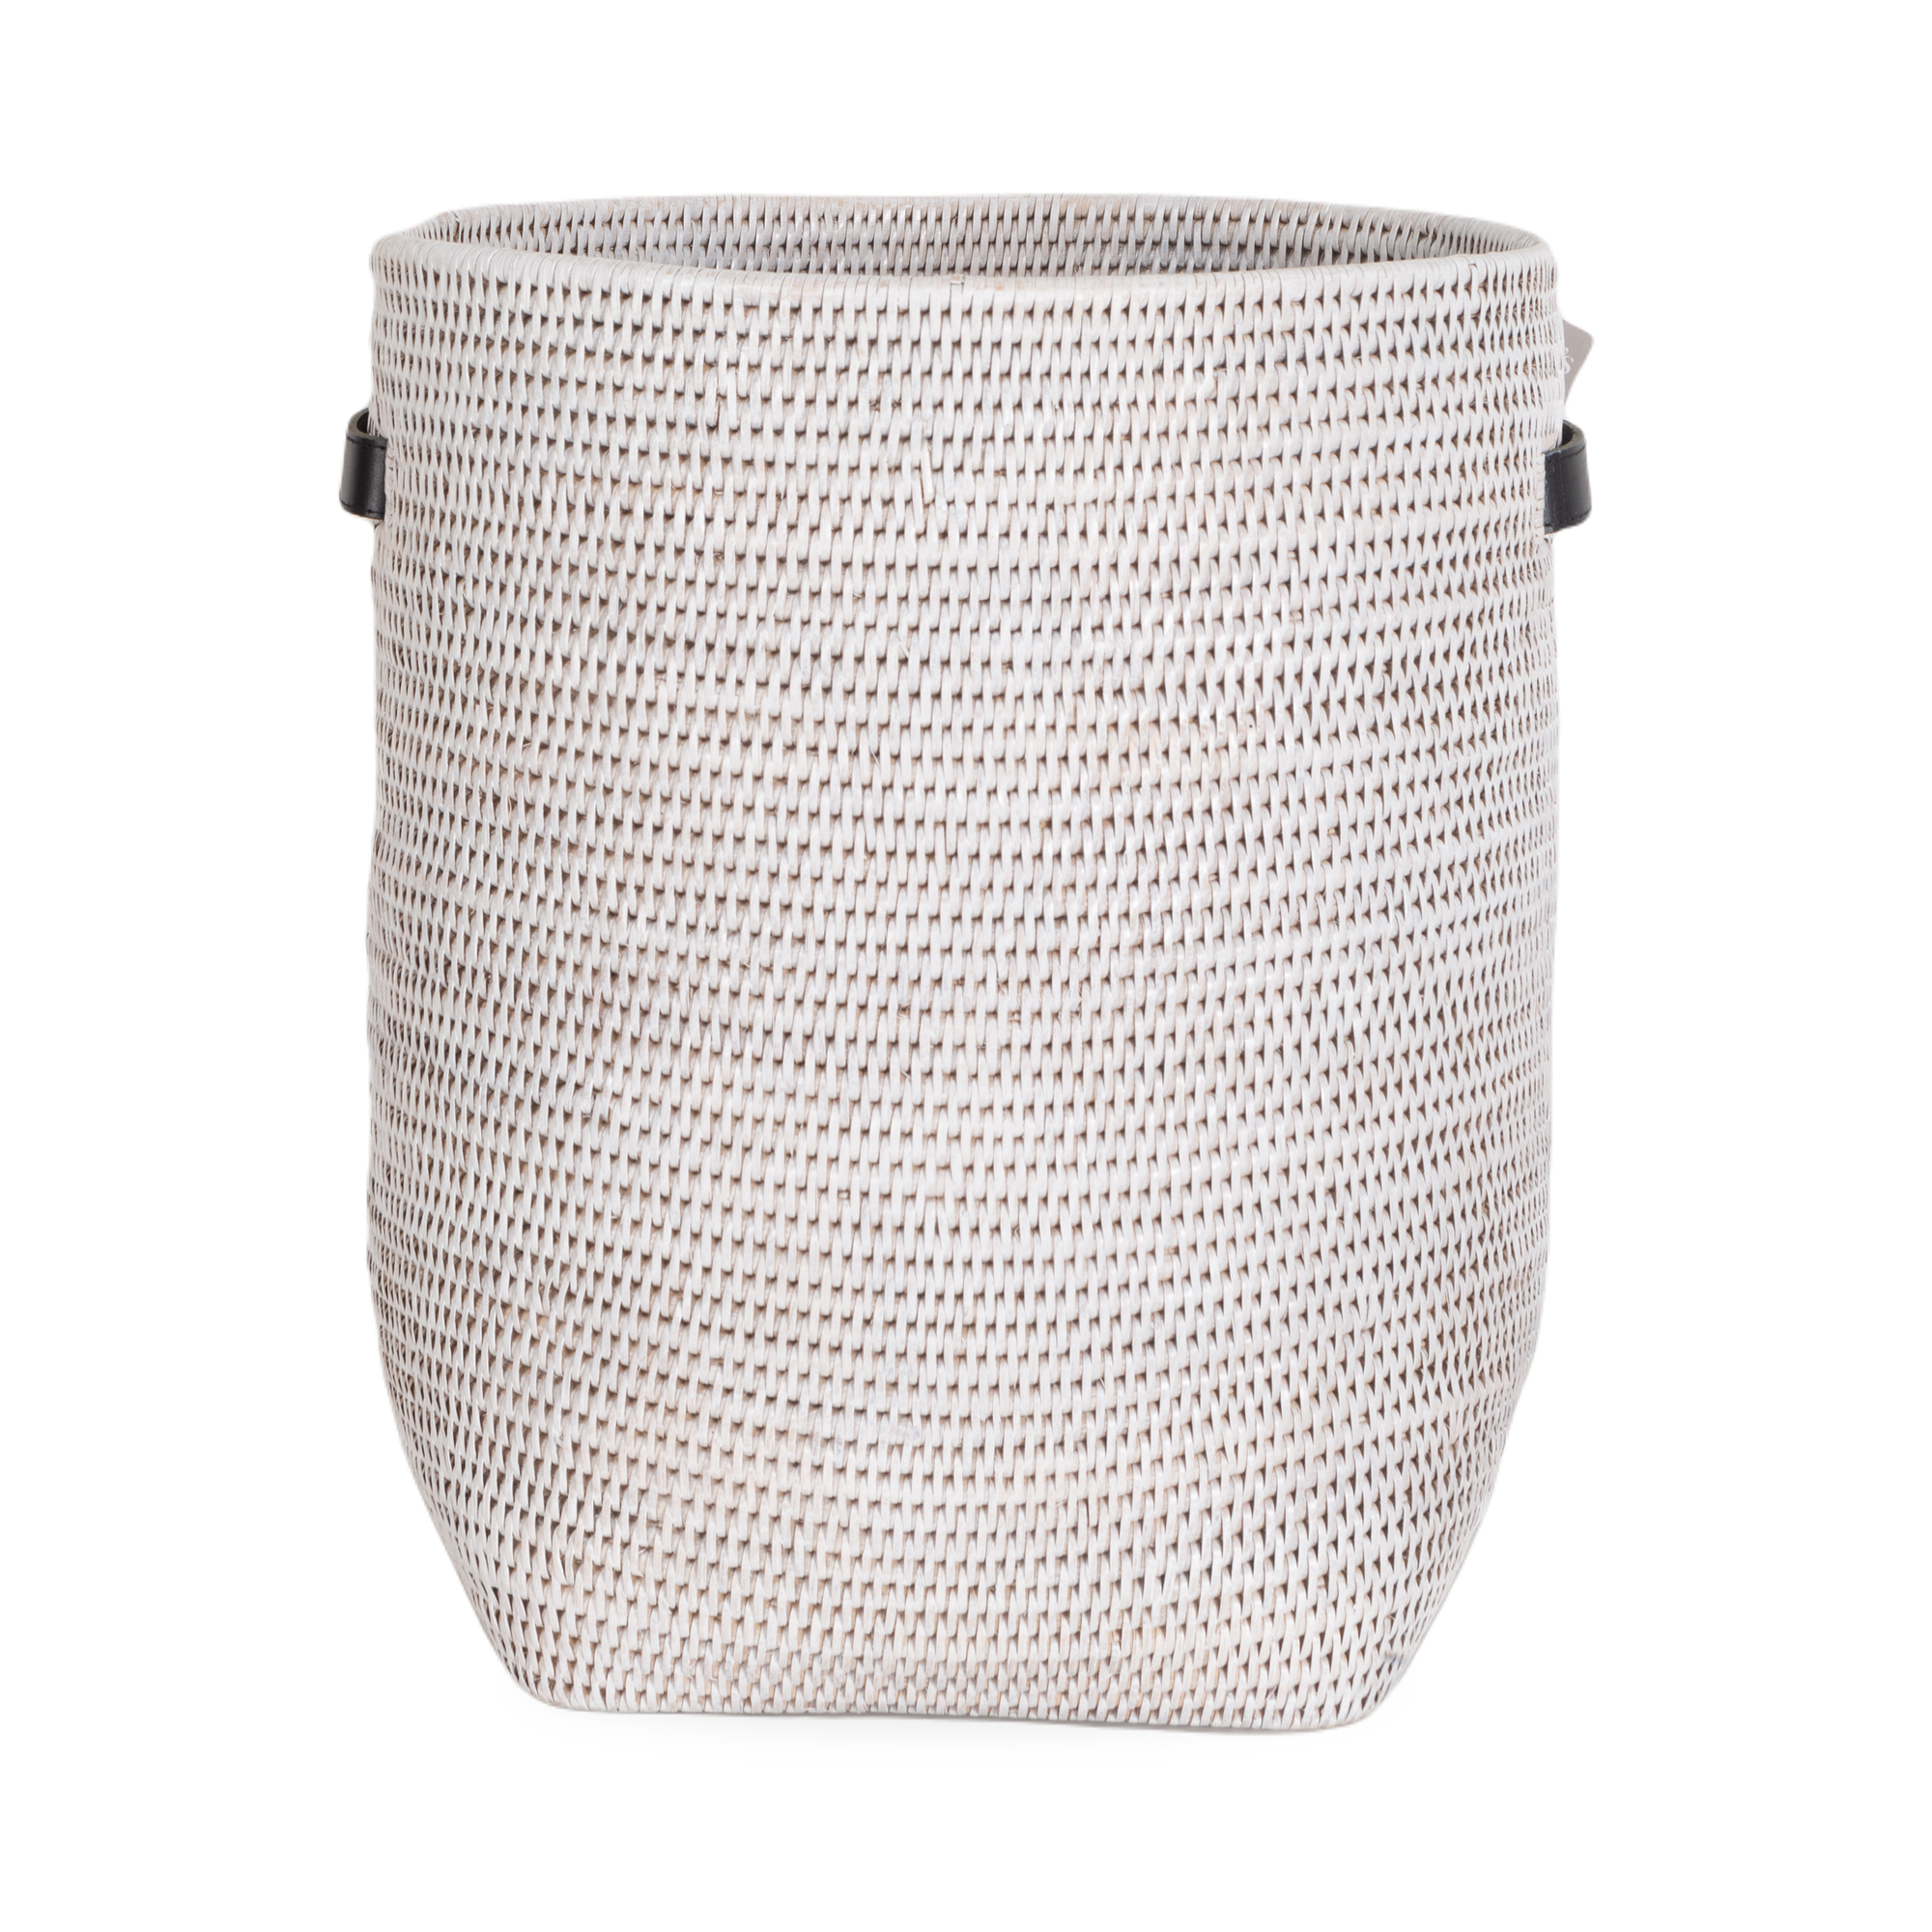 Defined by it's pleasant curves and intricate hand-woven design, the Rattan Handle Basket is made with a reliable and durable rattan body which allows this basket to be incredibly 